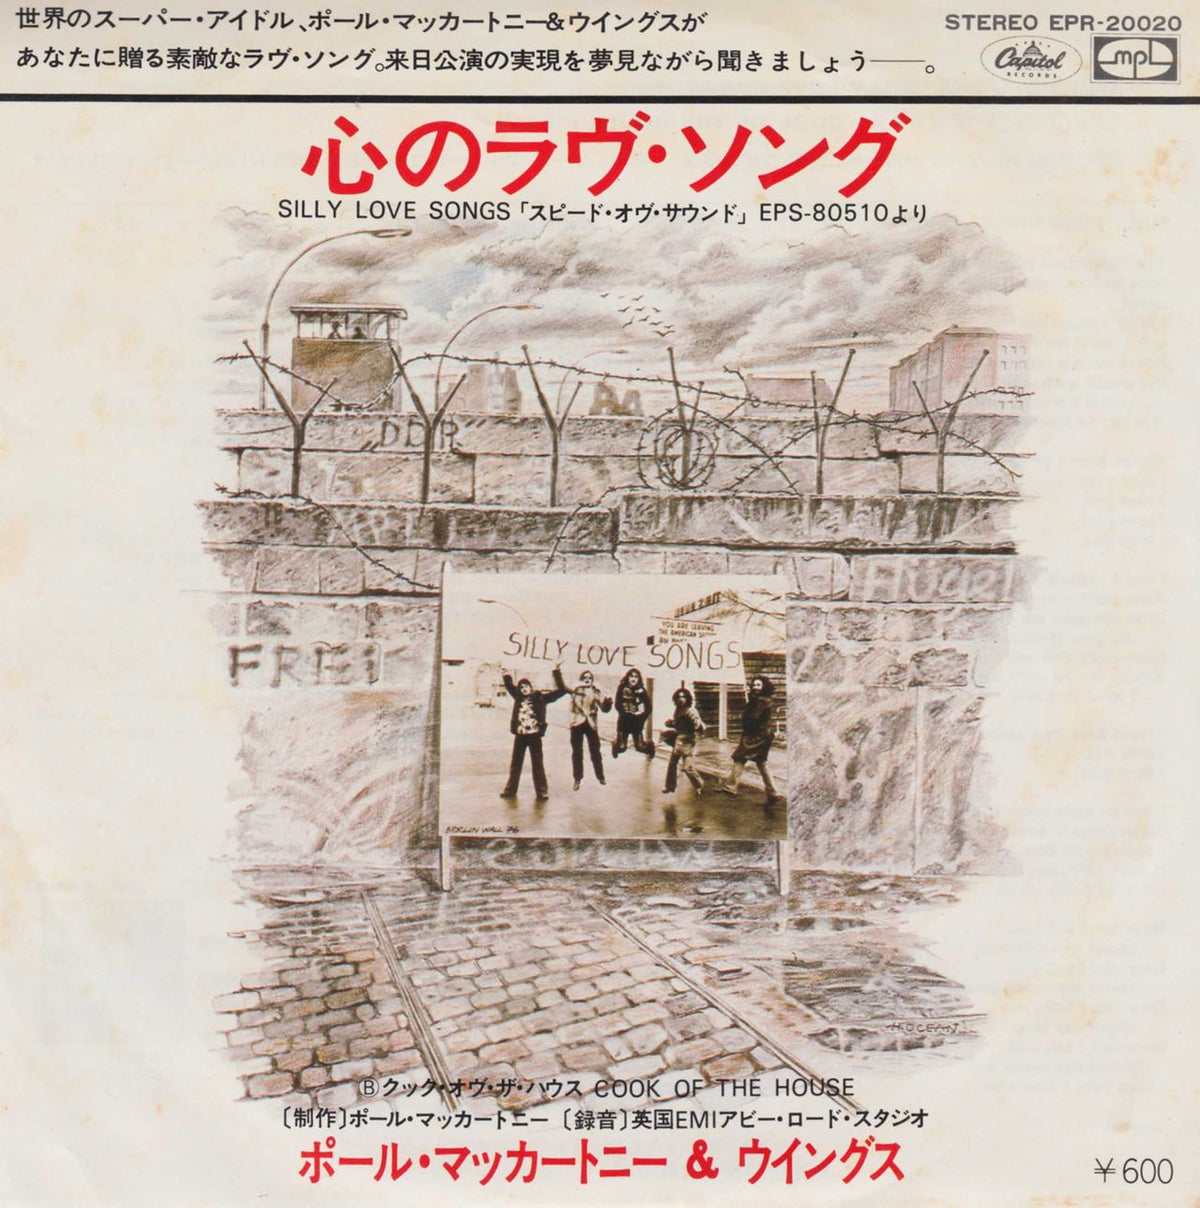 Paul McCartney and Wings Silly Love Songs - Black & Silver Japanese 7